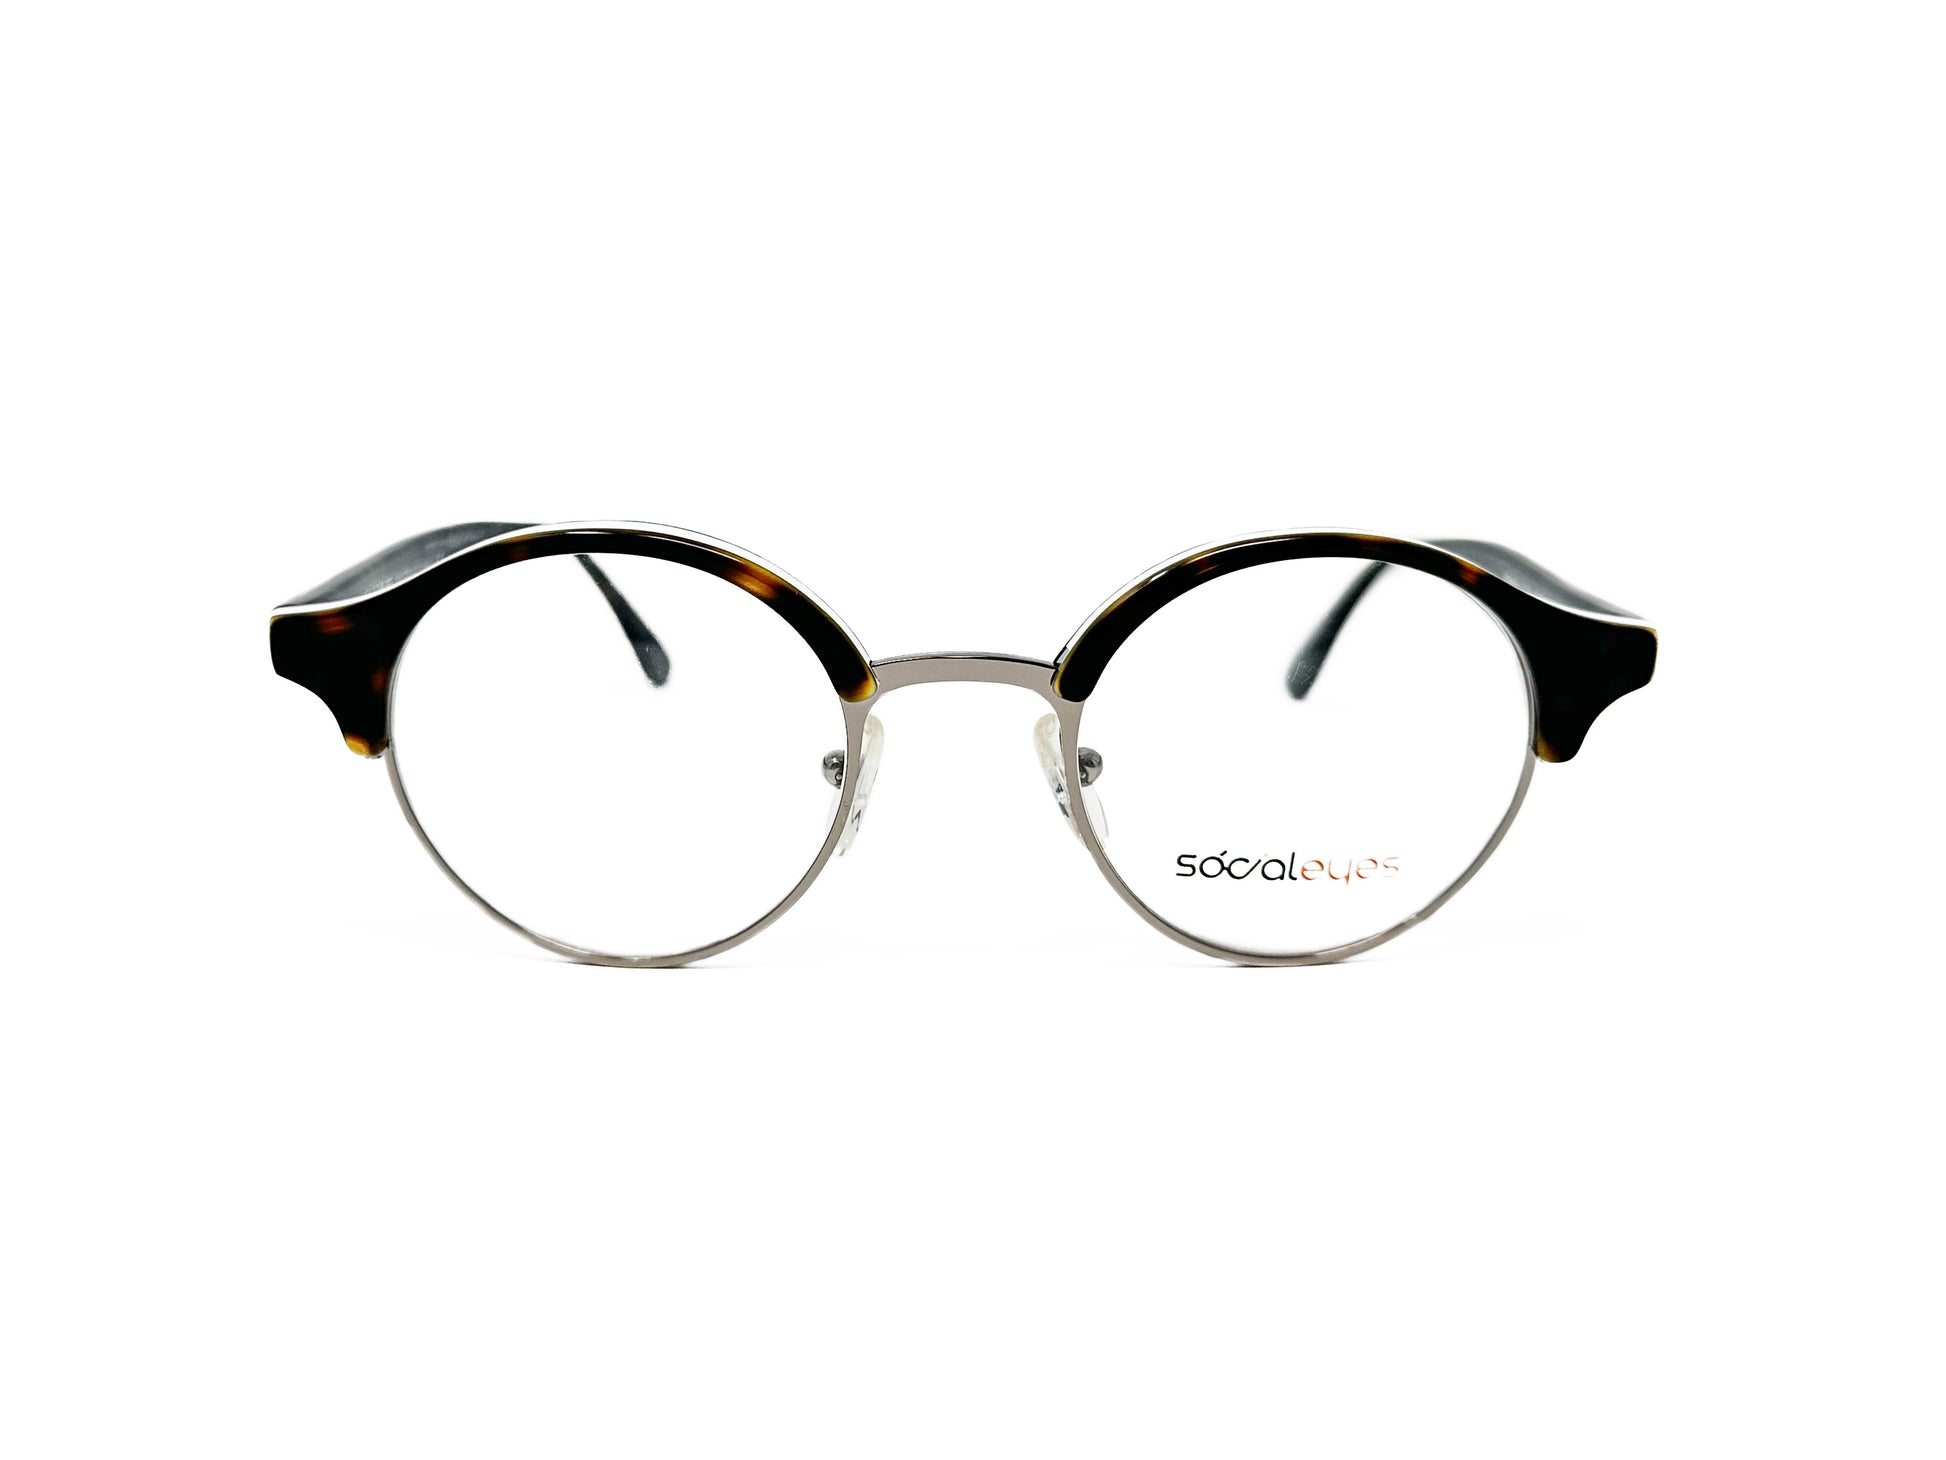 Social Eyes round metal, with acetate trim, optical frame. Model: Benny. Color: C04 - Dark Tortoise with white trim. Front  view.